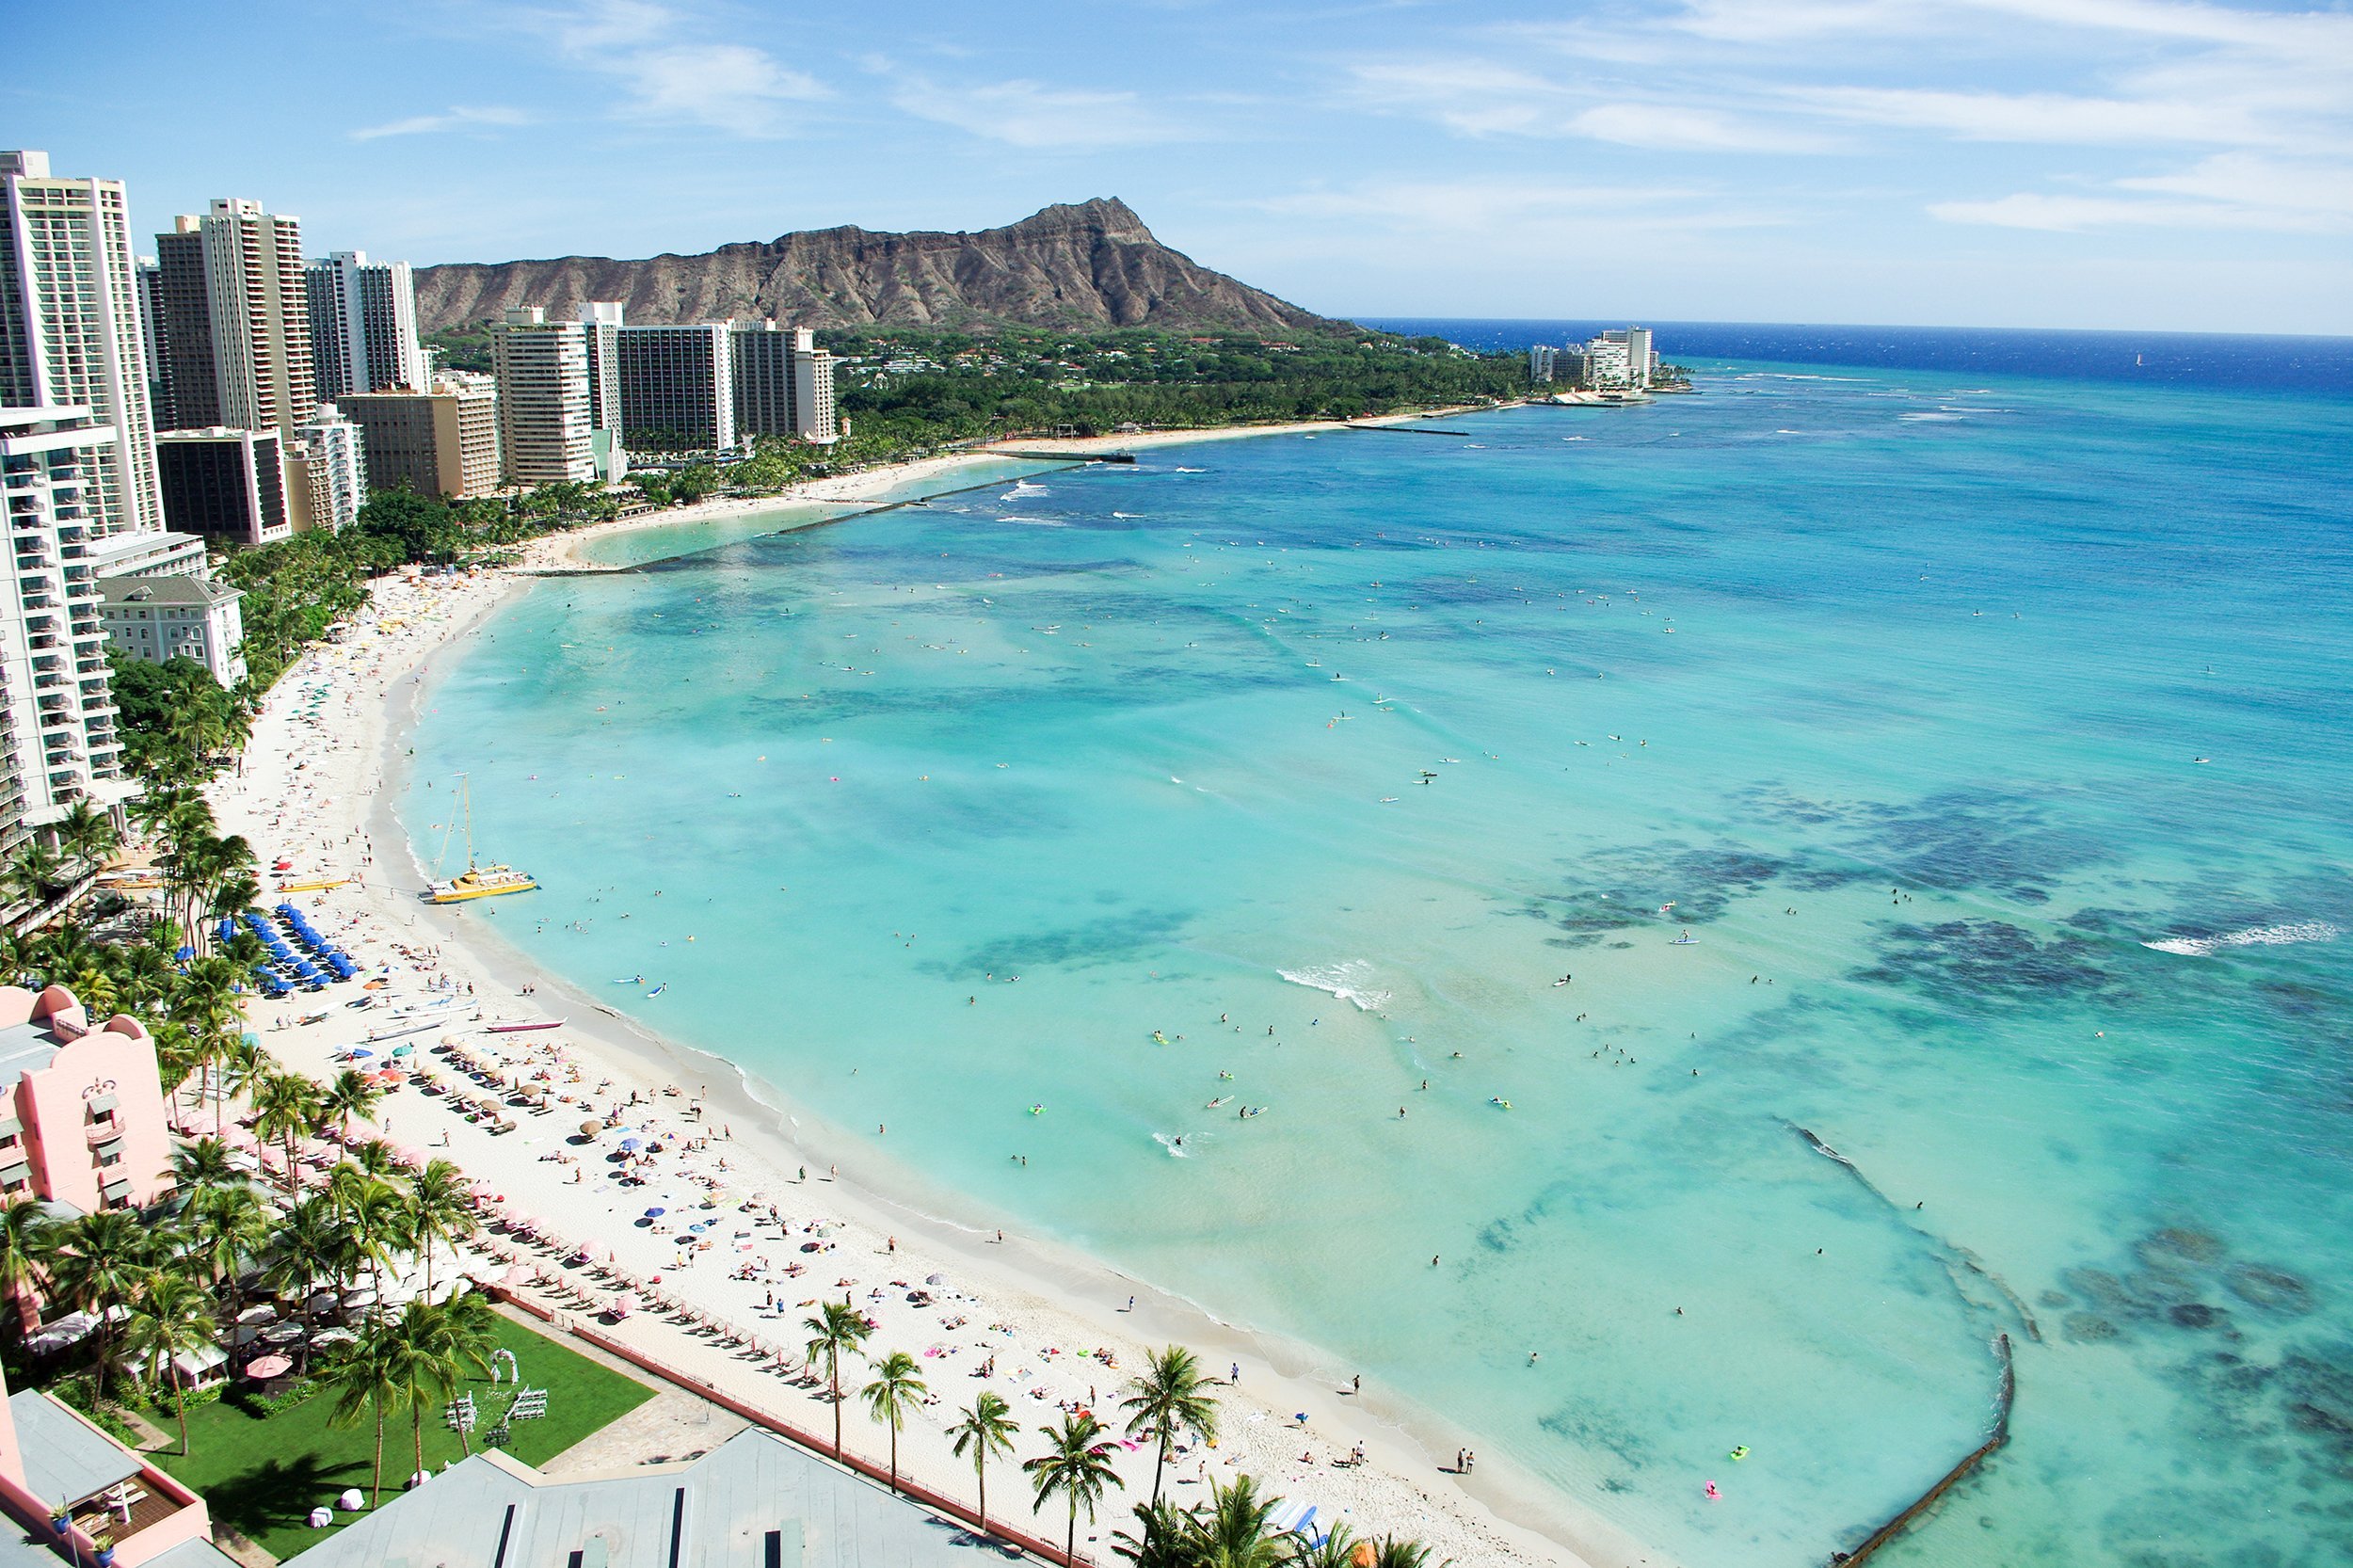 <p>From iconic Waikiki Beach you can see Diamond Head, one of the world's most popular climbable volcanoes. There's also nearly two miles of white sand, and warm, turquoise water. But if you're after solitude — or just some room to spread a beach blanket — this isn't the best choice.</p>